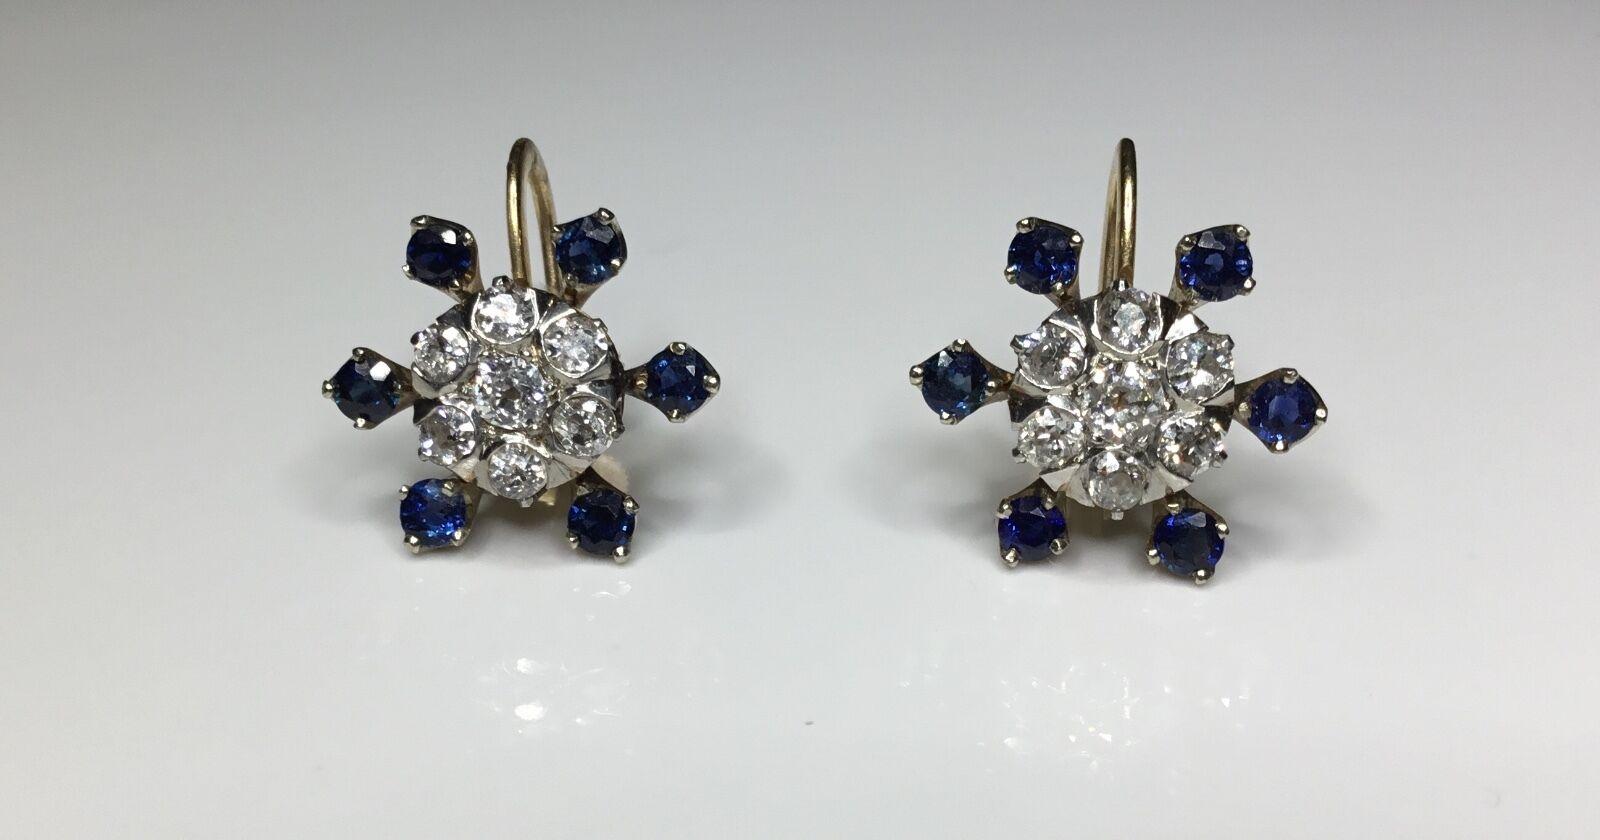 Details:

Estate Antique 14K Yellow Gold 2.50 CTW Old Mine Cut Diamond & Sapphire Clip-on Earrings

There 14 Round Natural Old Mine Cut Diamonds Weighing Approximately 1.30 Carat Total Weight.
Color Grade: G-H
Clarity Grade: VS-SI1

12 Round Natural